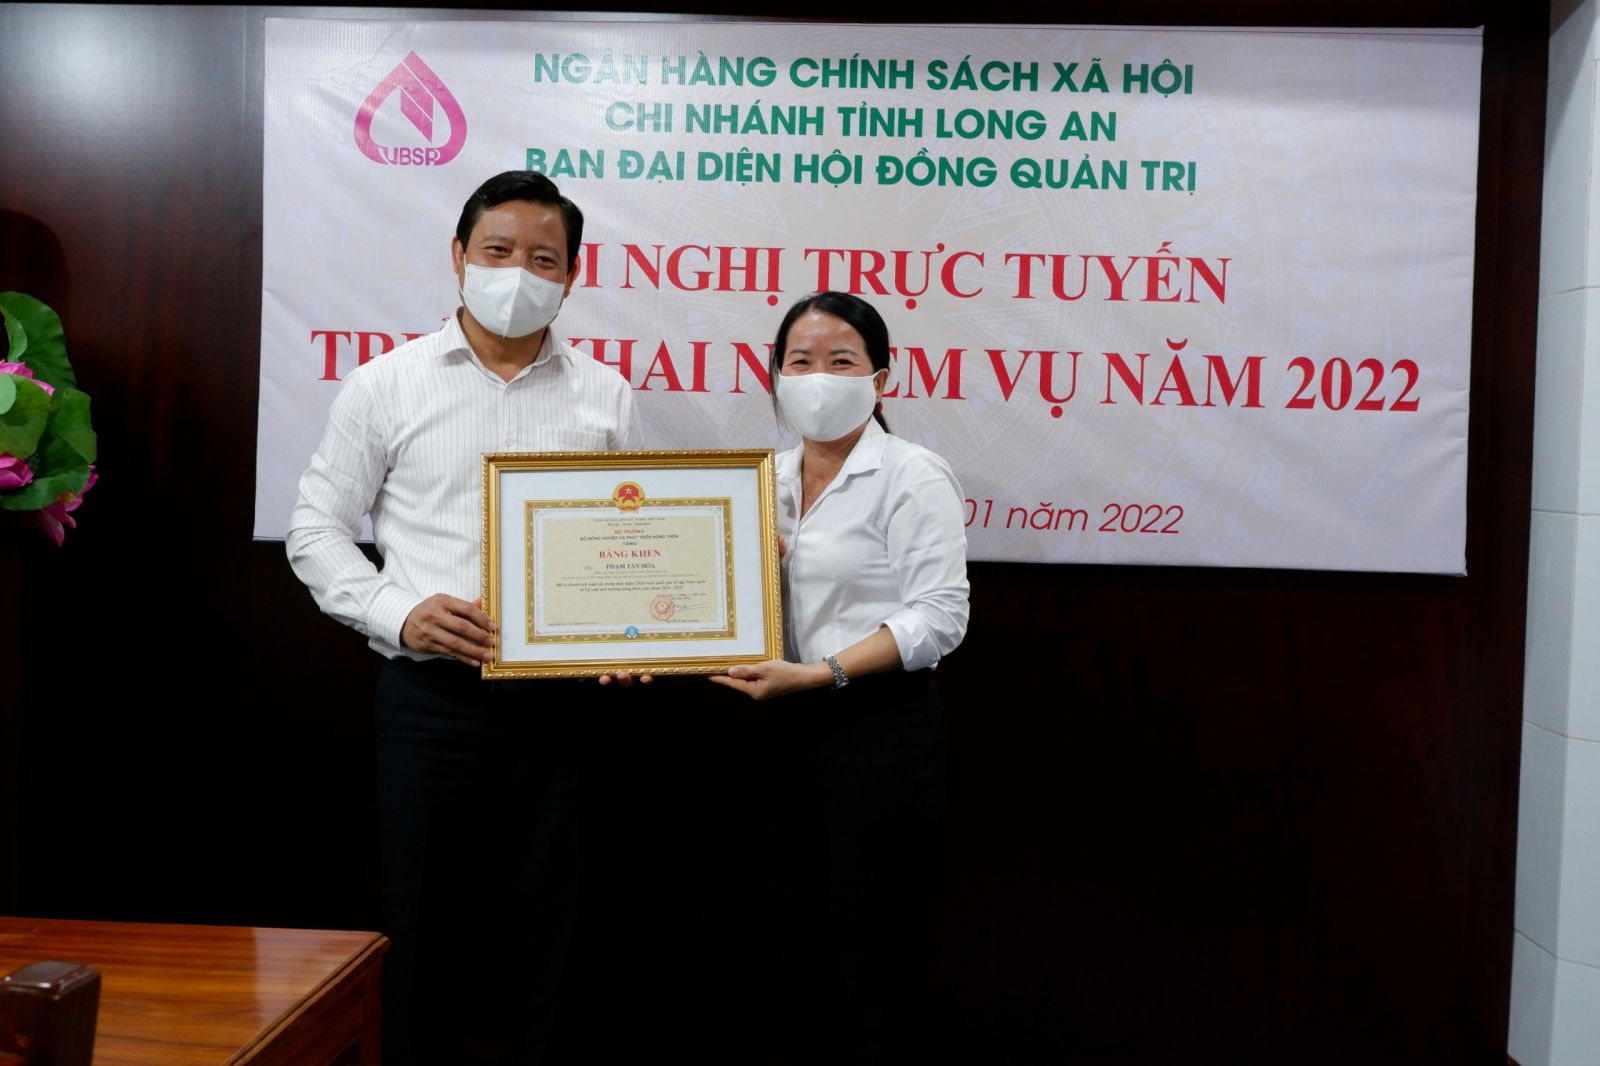 Vice Chairman of the Provincial People's Committee - Pham Tan Hoa receives the certificate of merit from the Ministry of Agriculture and Rural Development